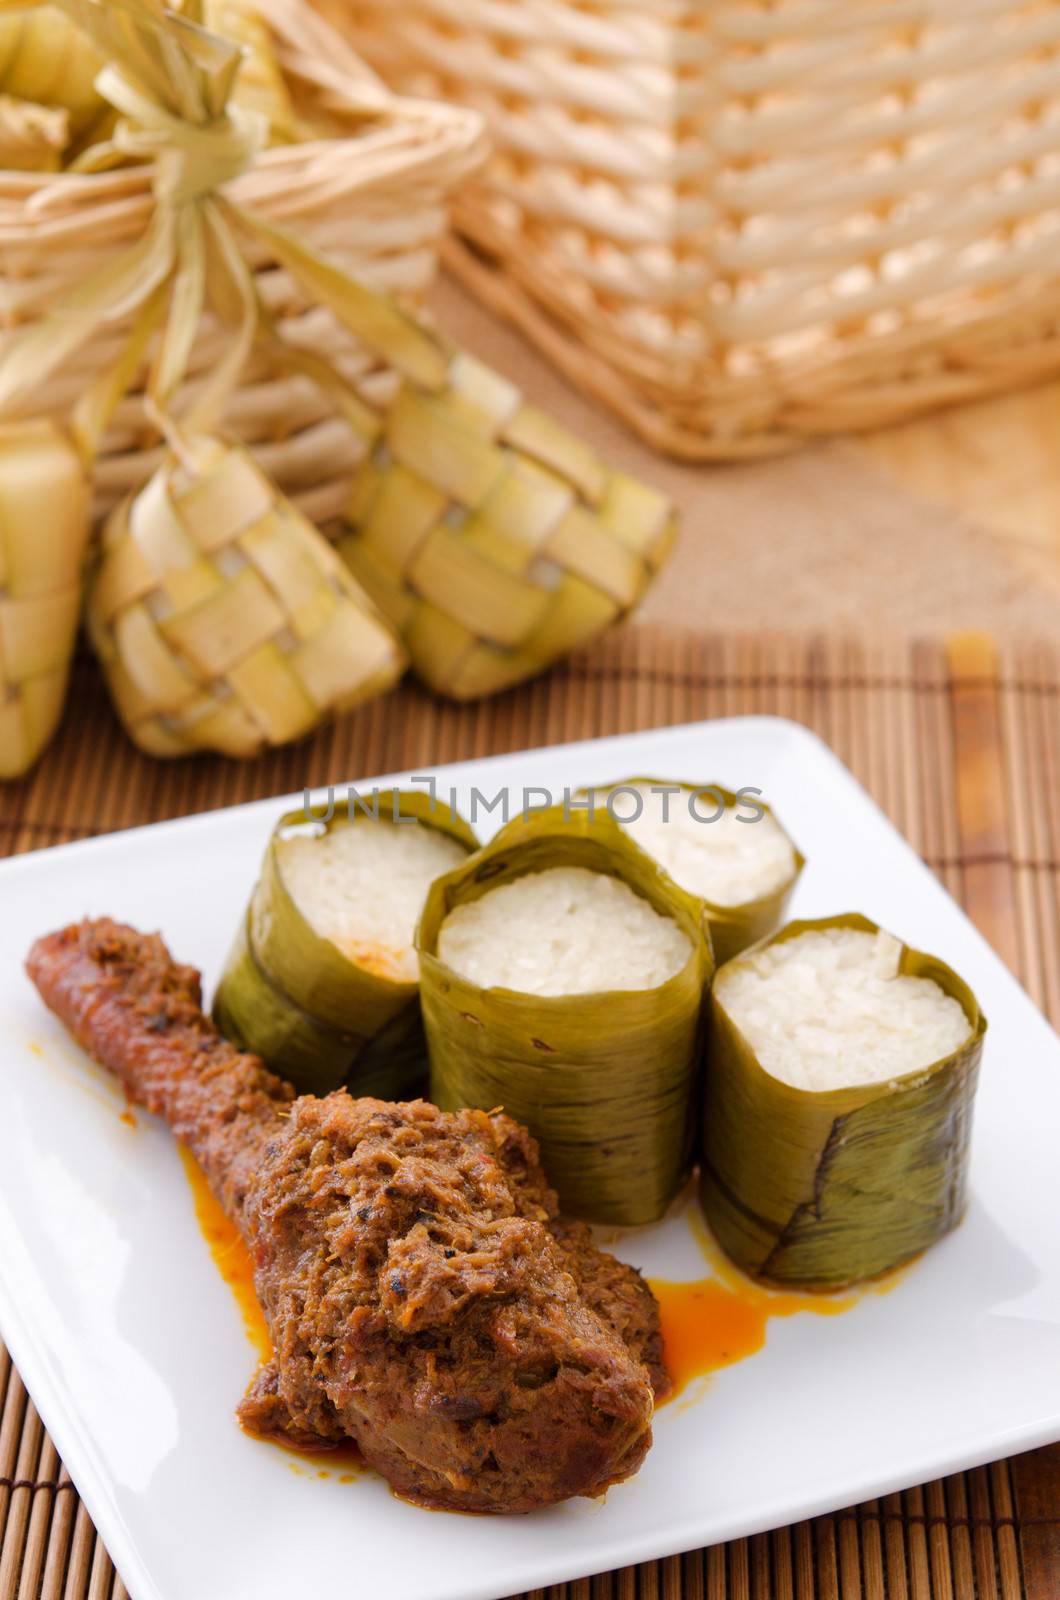 Lemak Lemang, traditional Malaysian food made of glutinous rice, coconut milk and salt. Cooked in a hollowed bamboo stick lined with banana leaves. Served during ramadan festival or hari raya.